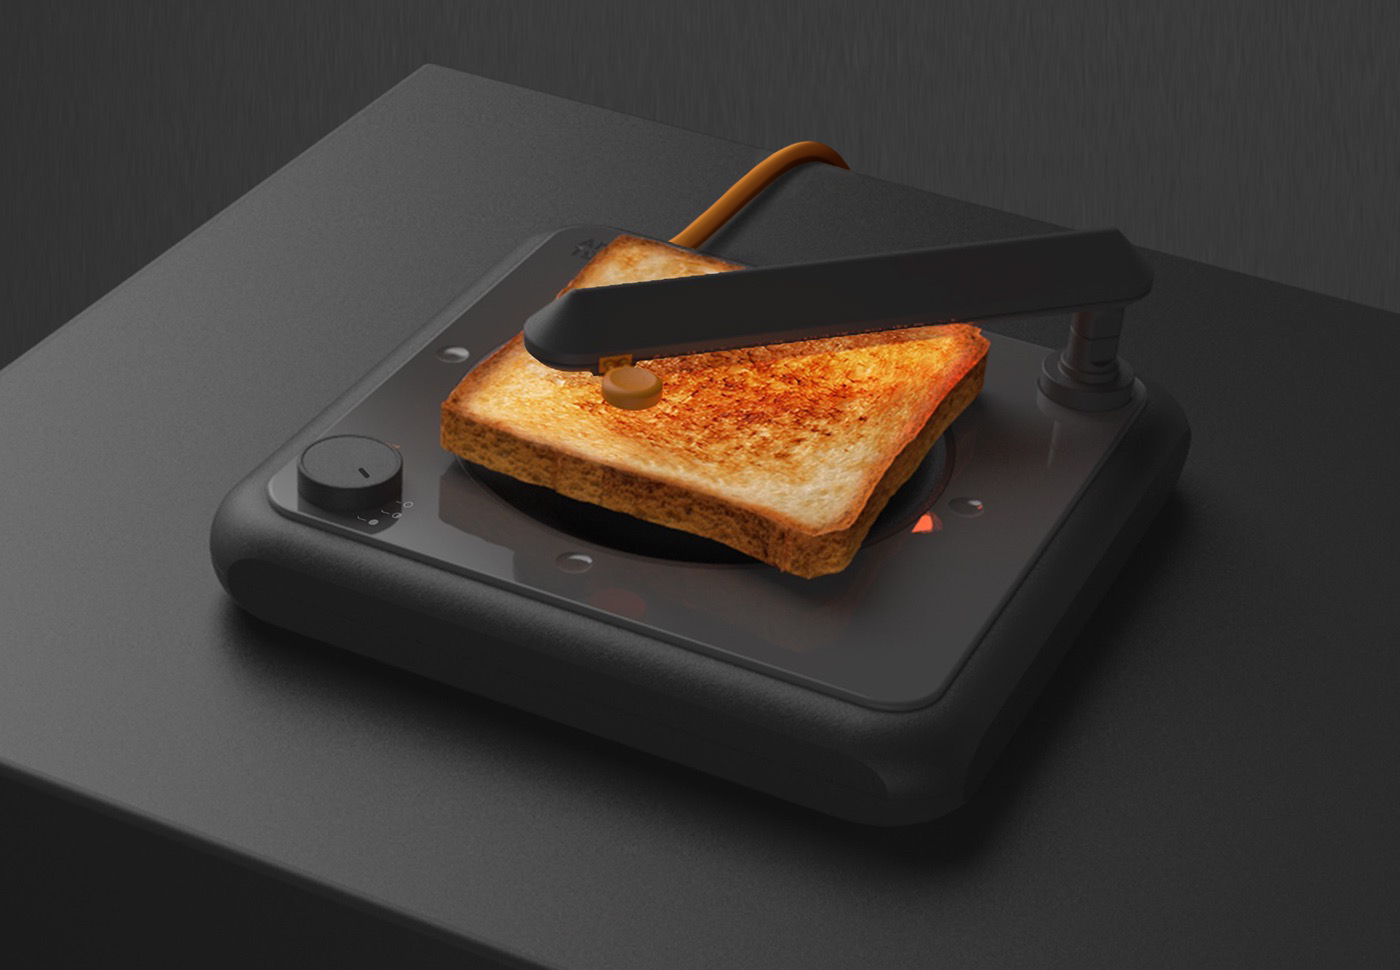 product toaster black appliance industrial design  product design  creative design life record